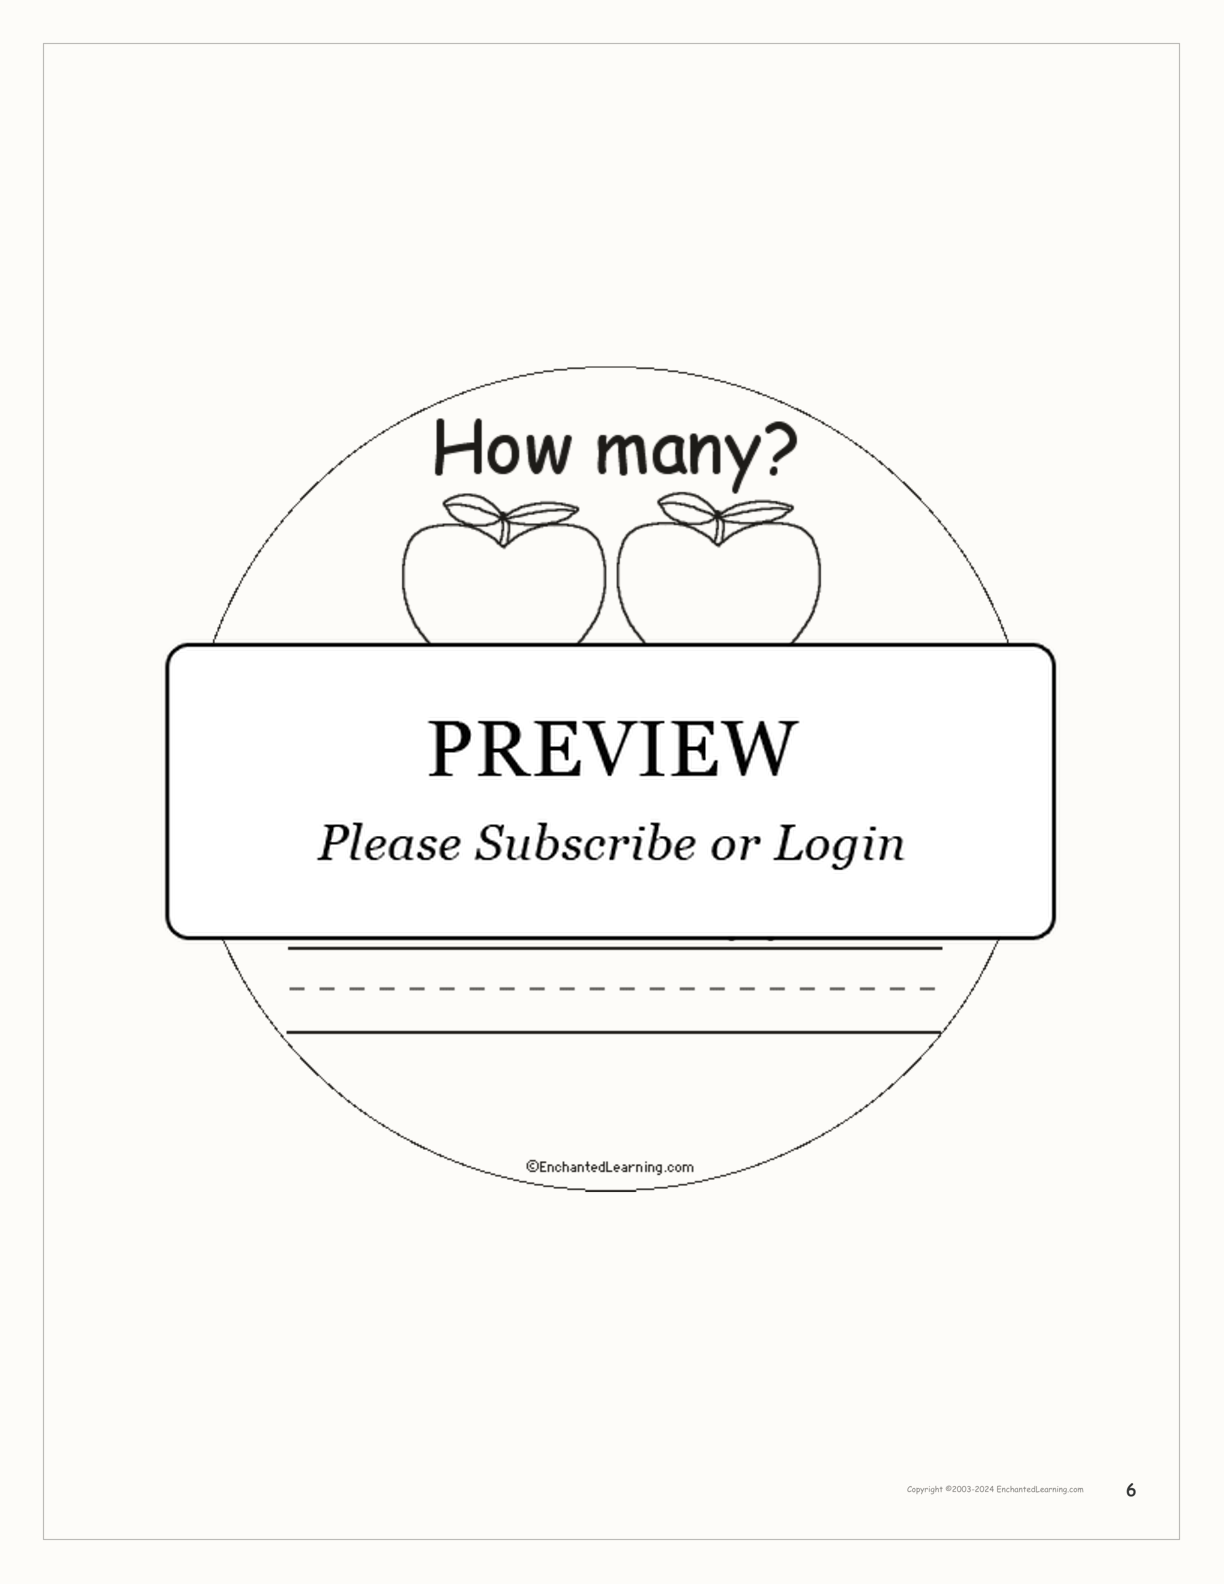 How Many Apples? interactive printout page 6